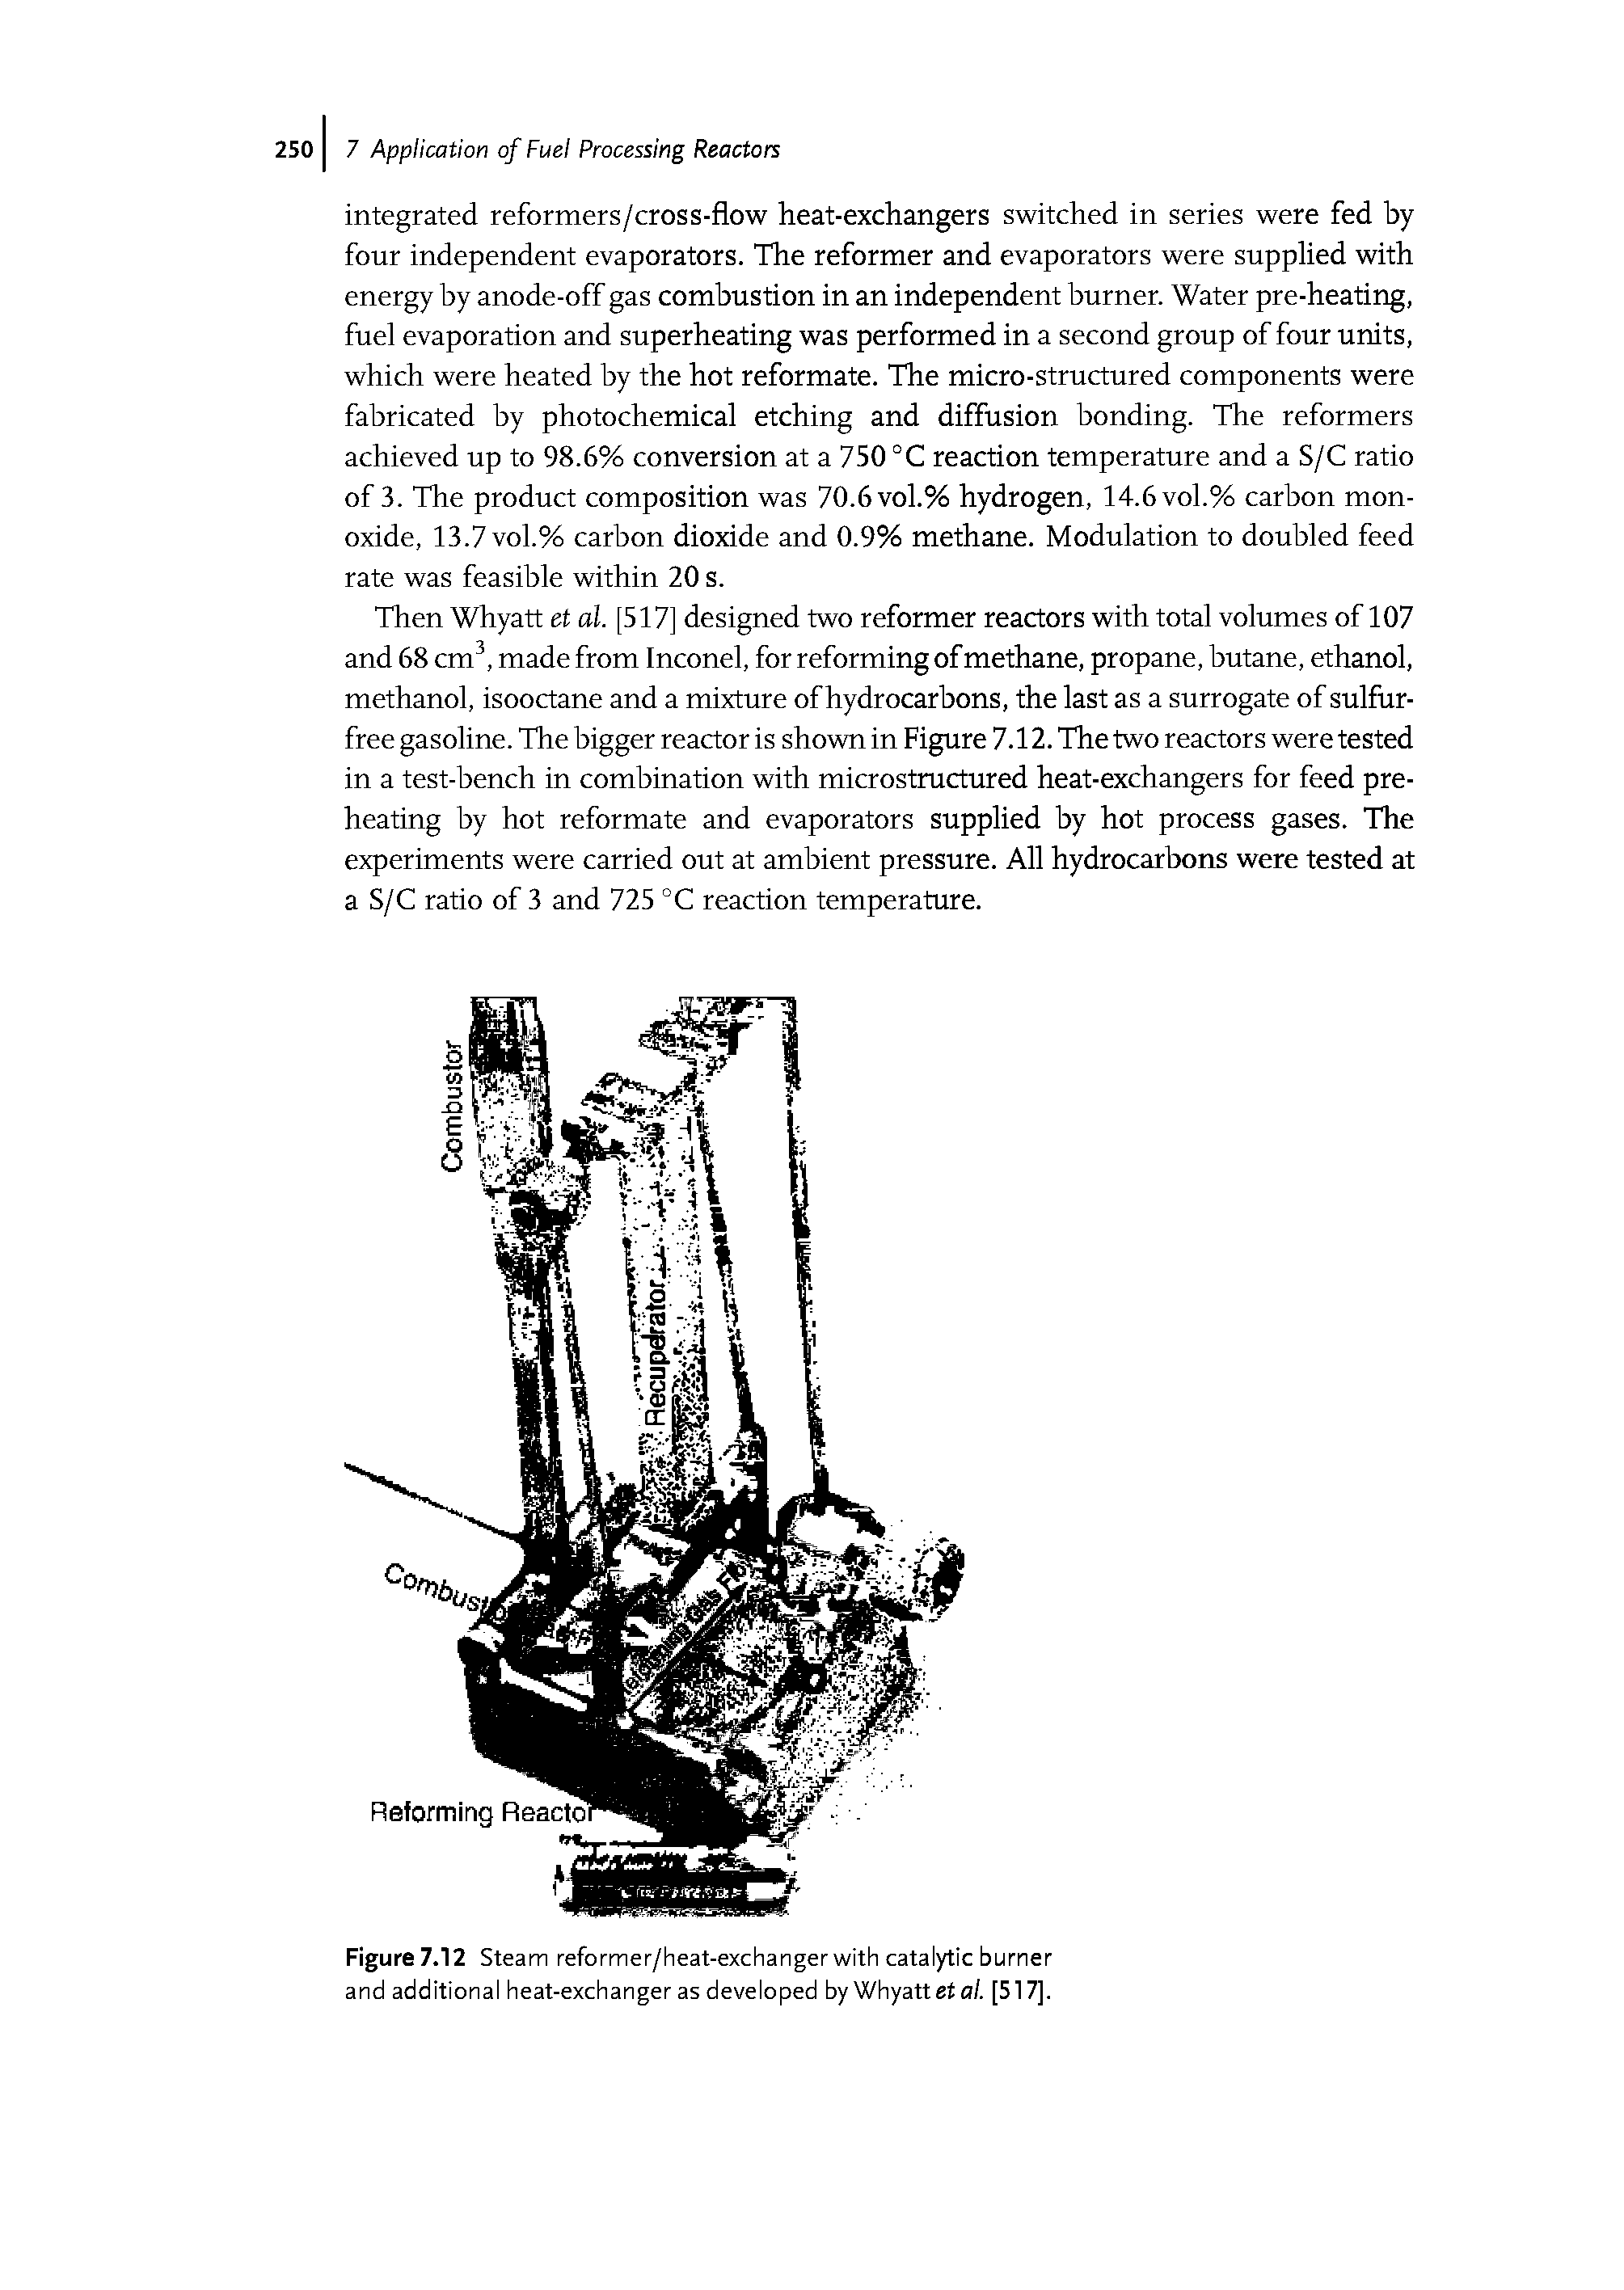 Figure 7.12 Steam reformer/heat-exchanger with catalytic burner and additional heat-exchanger as developed by Whyatt e o/. [517].